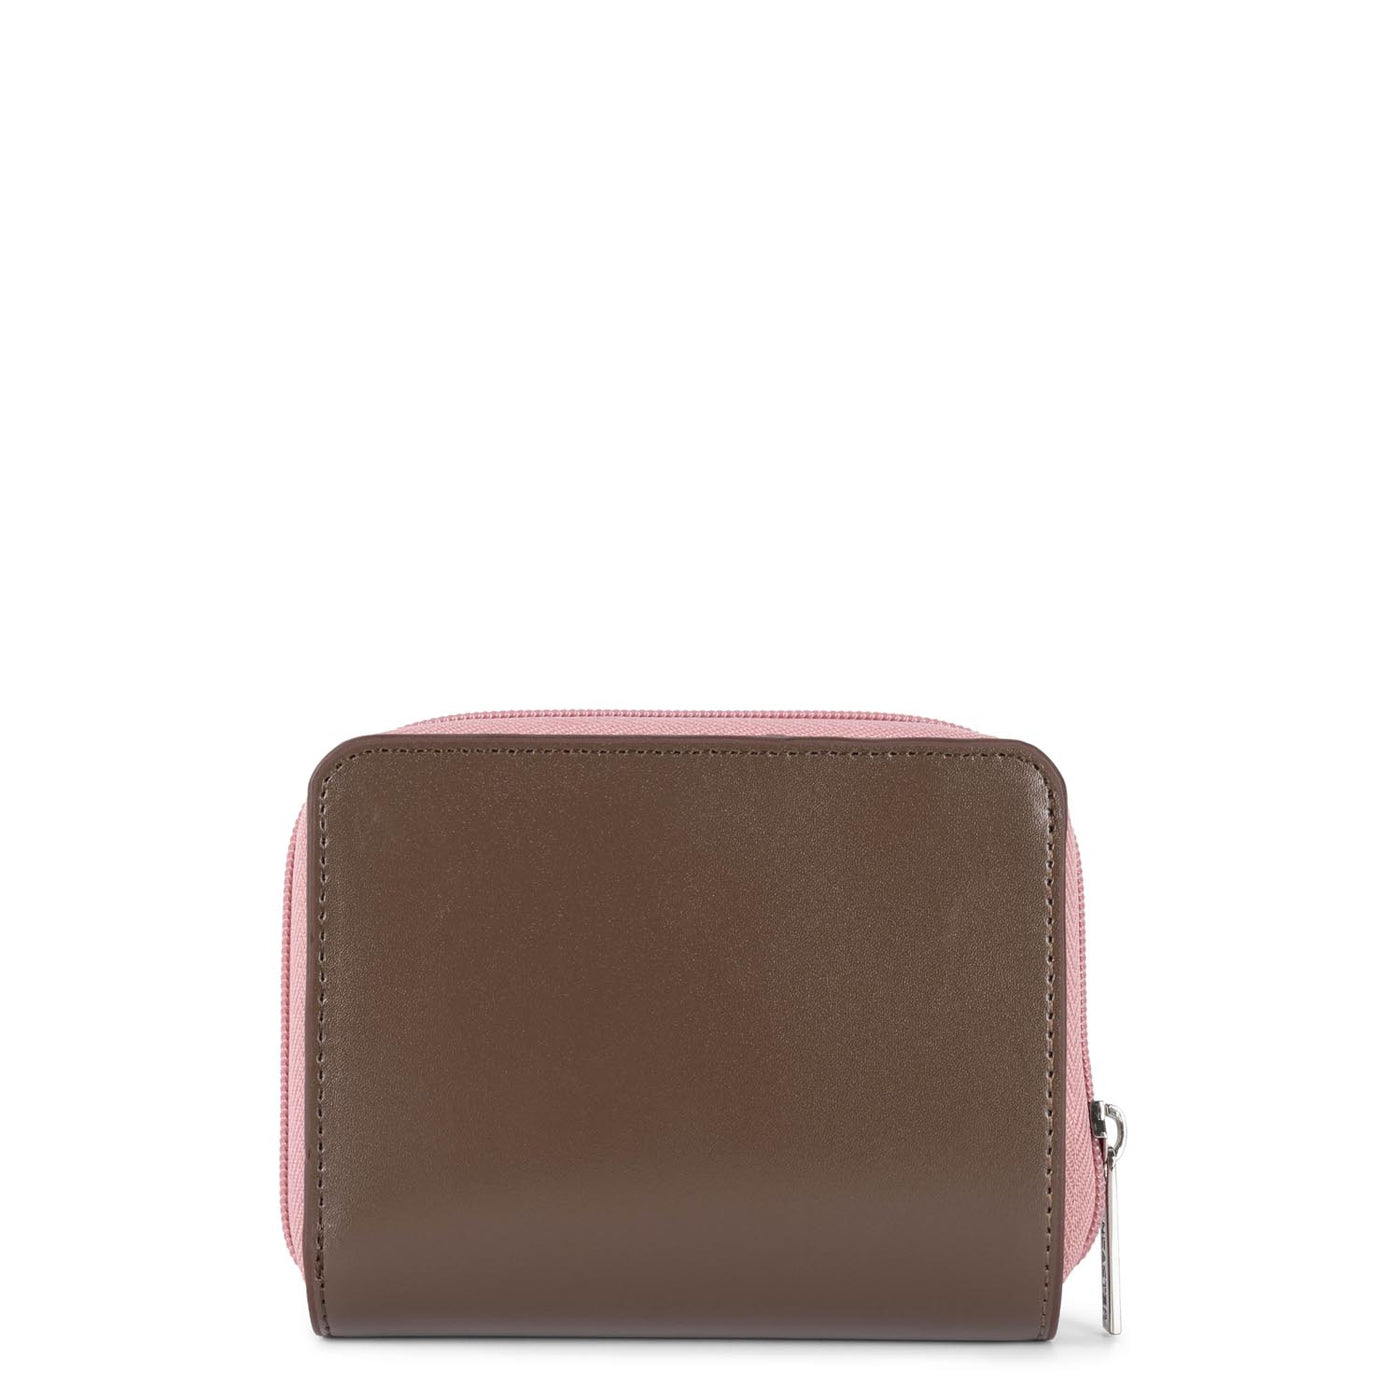 back to back wallet - smooth #couleur_marron-rose-antic-nude